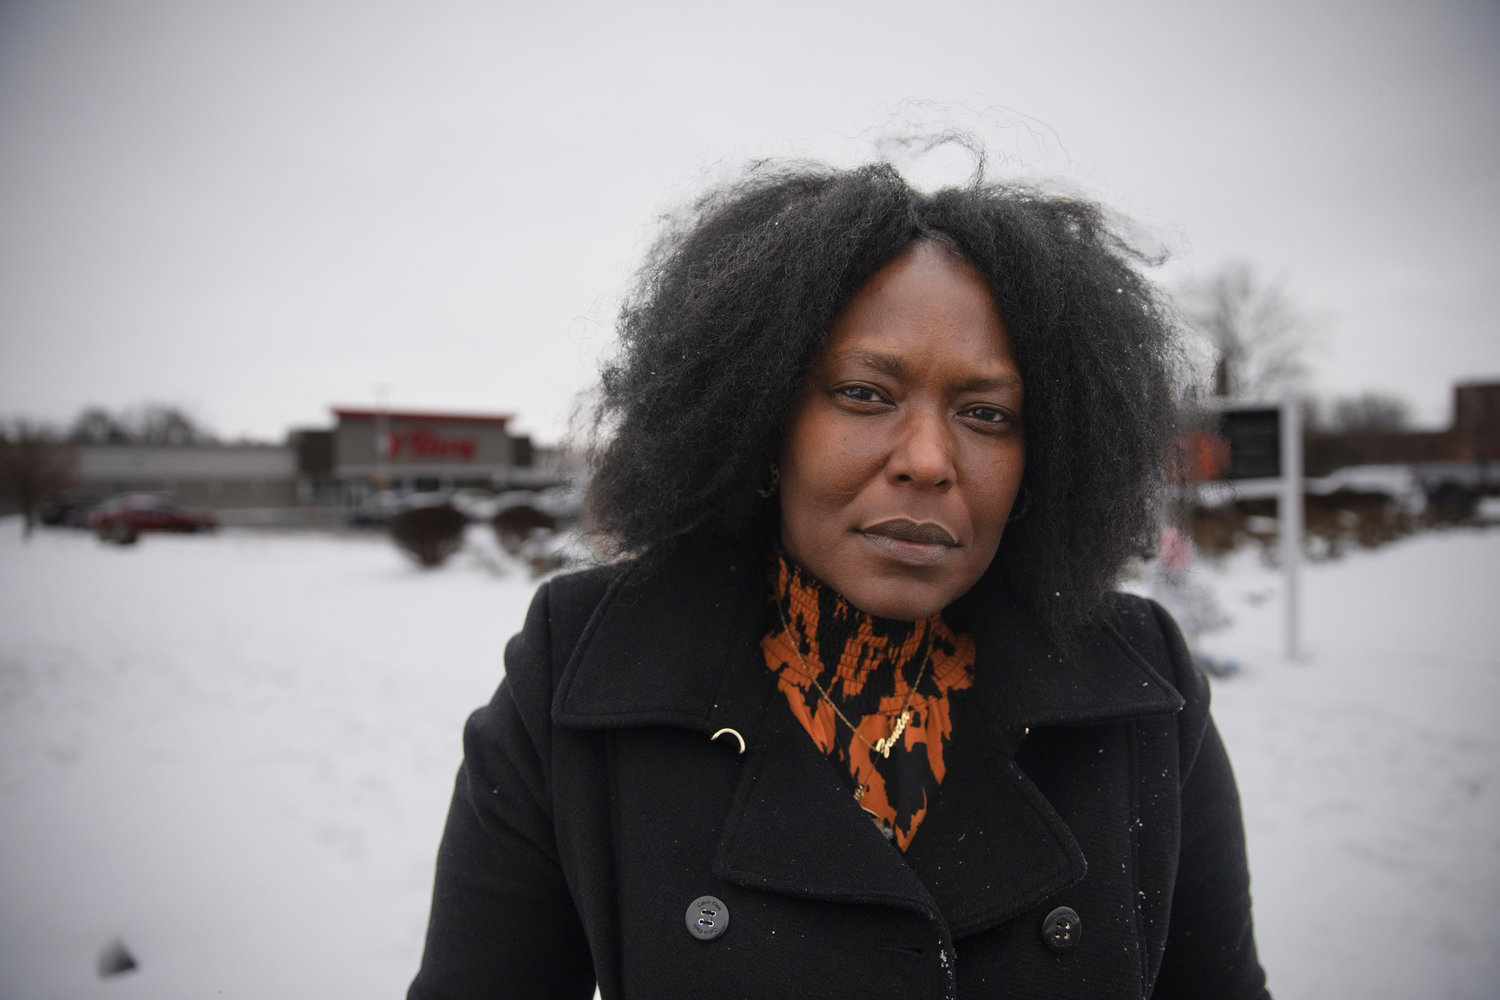 Zeneta Everhart stands outside a Tops supermarket in Buffalo, N.Y., on Jan. 27, 2023. Ten people were killed in the store in May 2022 after a gunman entered targeting Black people. Everhart's then-19-year-old son survived after being shot in the neck. “You know, we don’t want to hear about this. We don’t want to hear about our children dying by gun violence, and we don’t want to hear about our seniors” who were killed in the California studio attack. “How awful. How heartbreaking.”